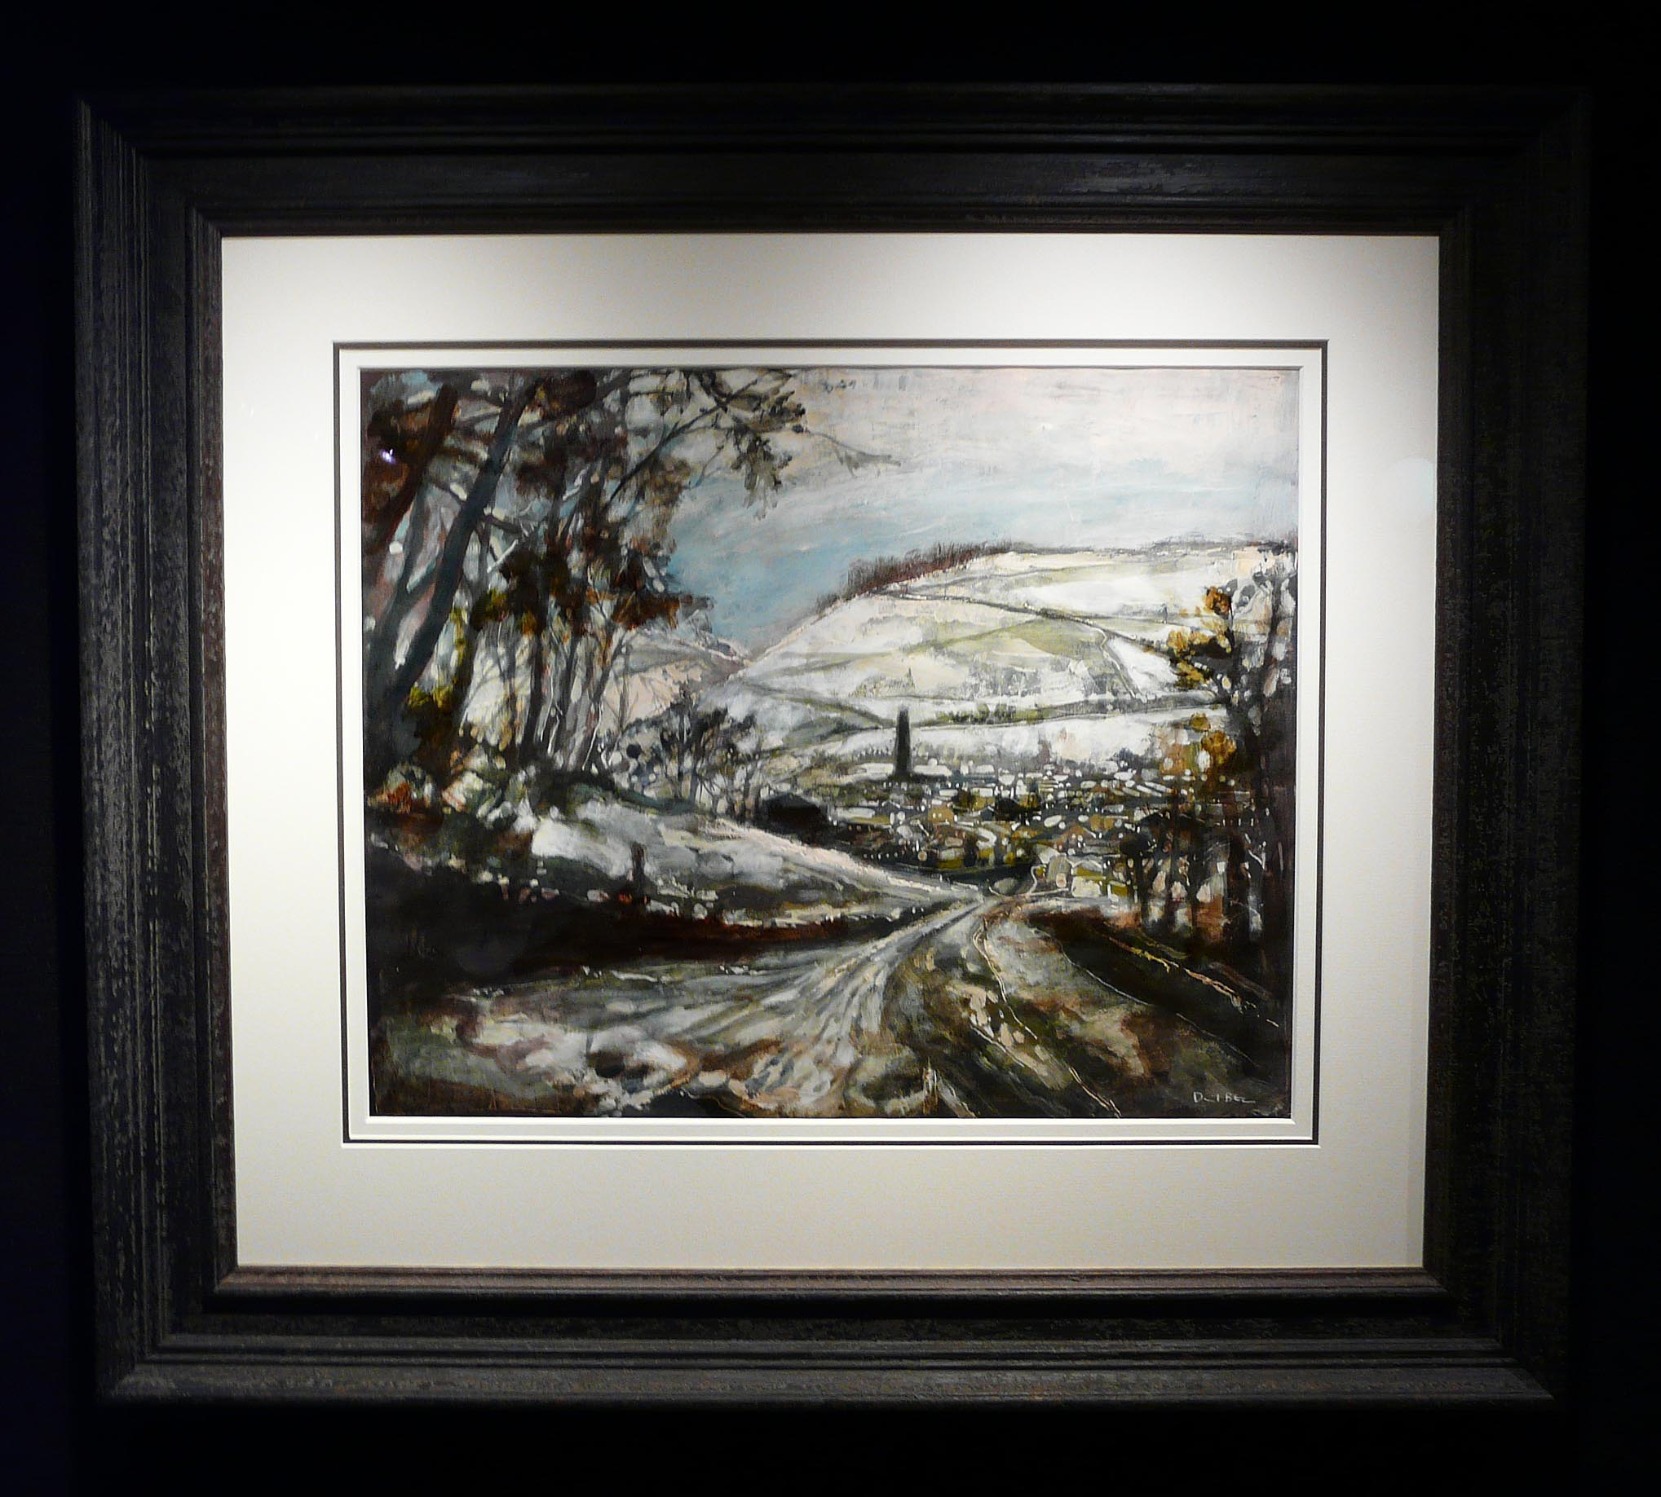 The Only Road into Town by David Bez